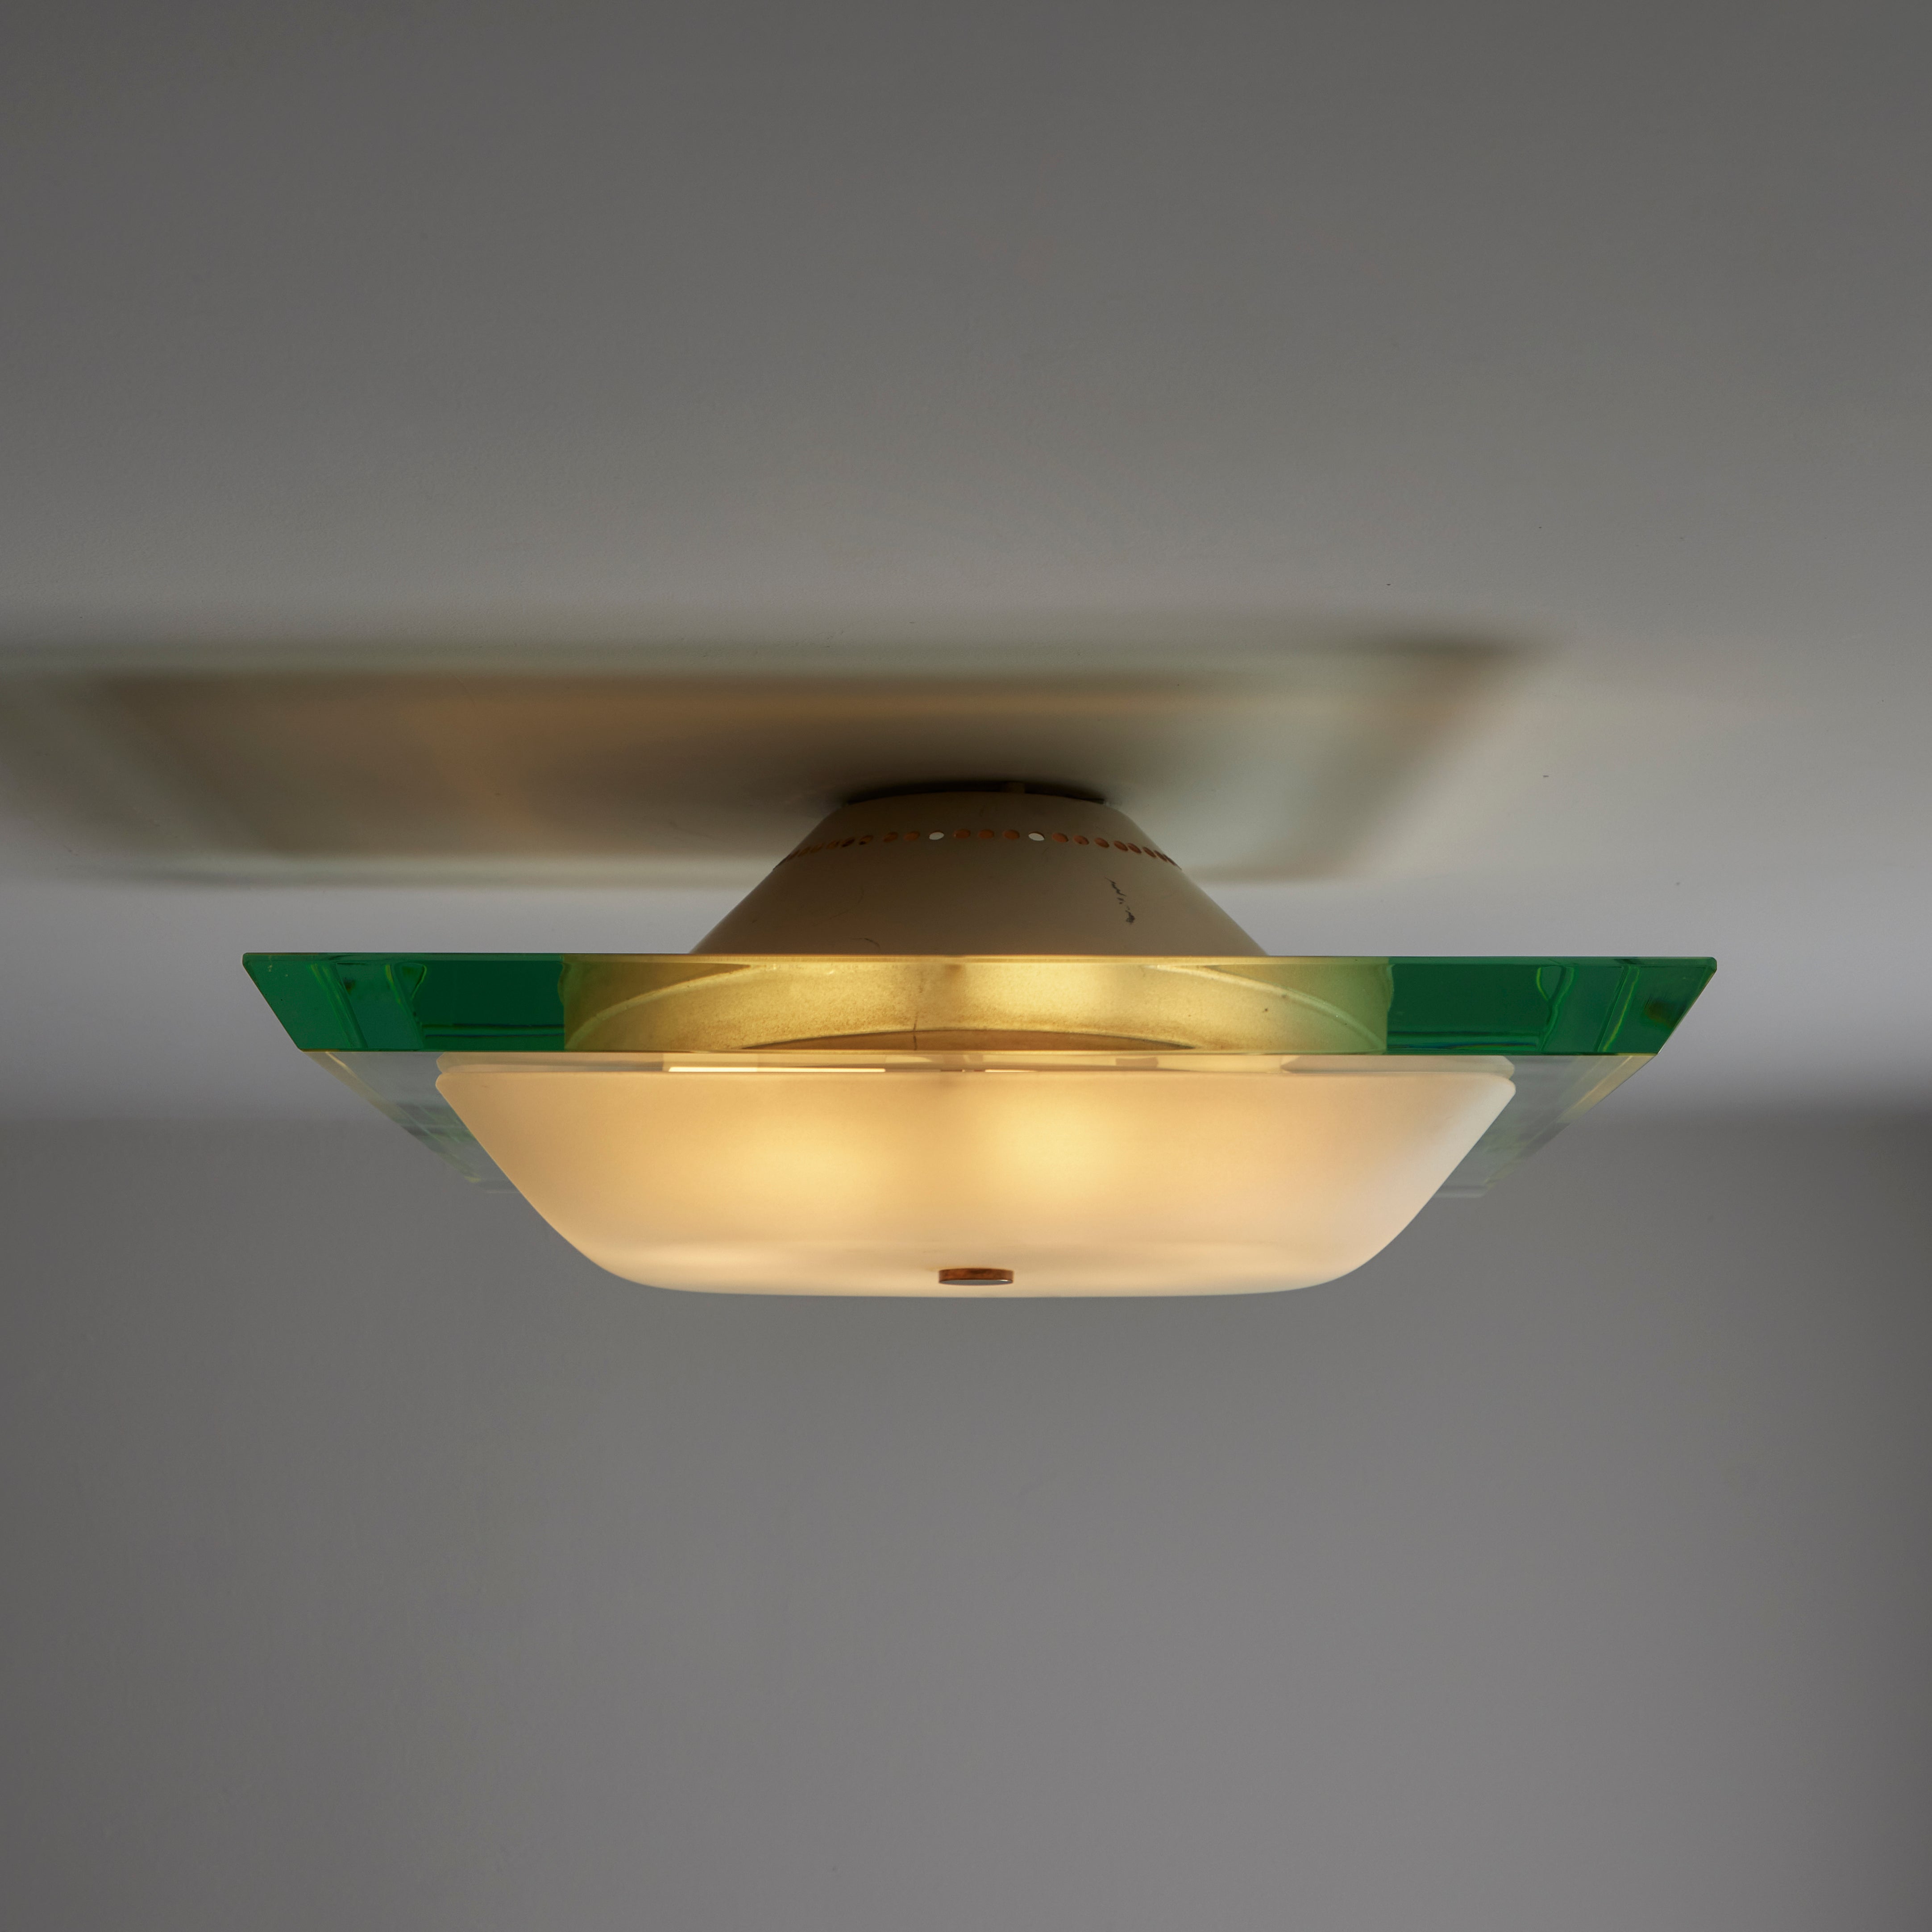 Mod. 1990 flush mount by Max Ingrand for Fontana Arte. Designed and manufactured in Italy circa the 1960s. Iconic and recognized teal blue thick cut and beveled cut glass from Fontana Arte makes this simple, striking ceiling light. A bottom frosted